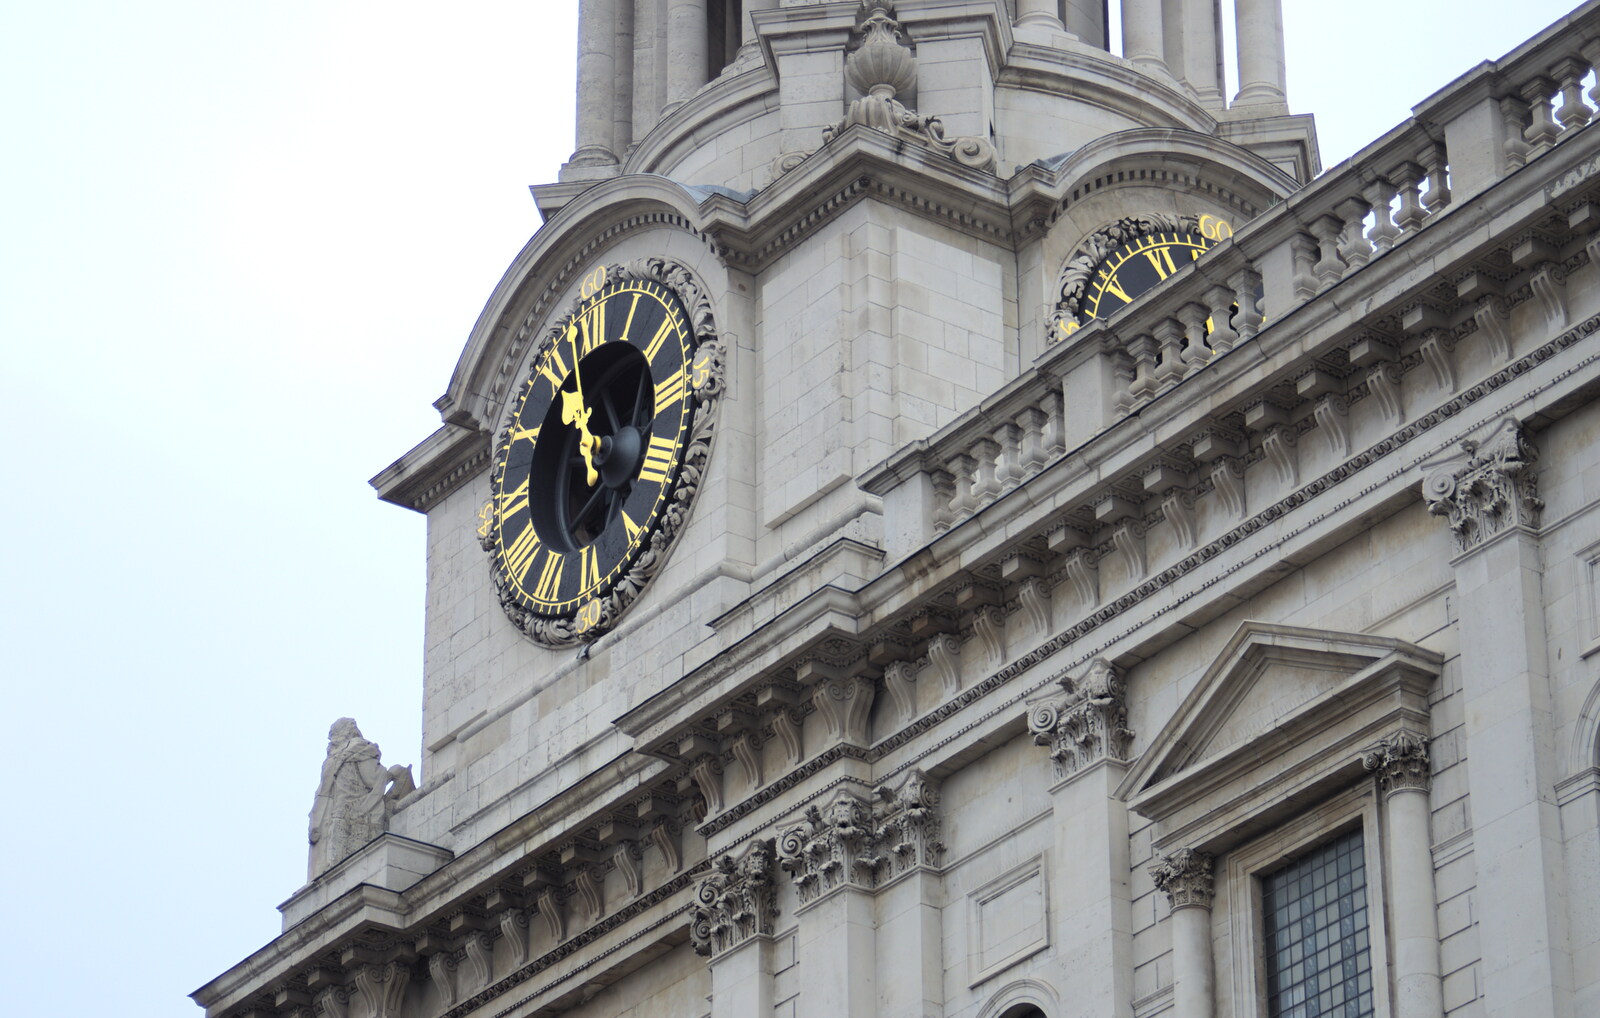 The clock of St. Paul's shows it's nearly time from Margaret Thatcher's Funeral, St. Paul's, London - 17th April 2013